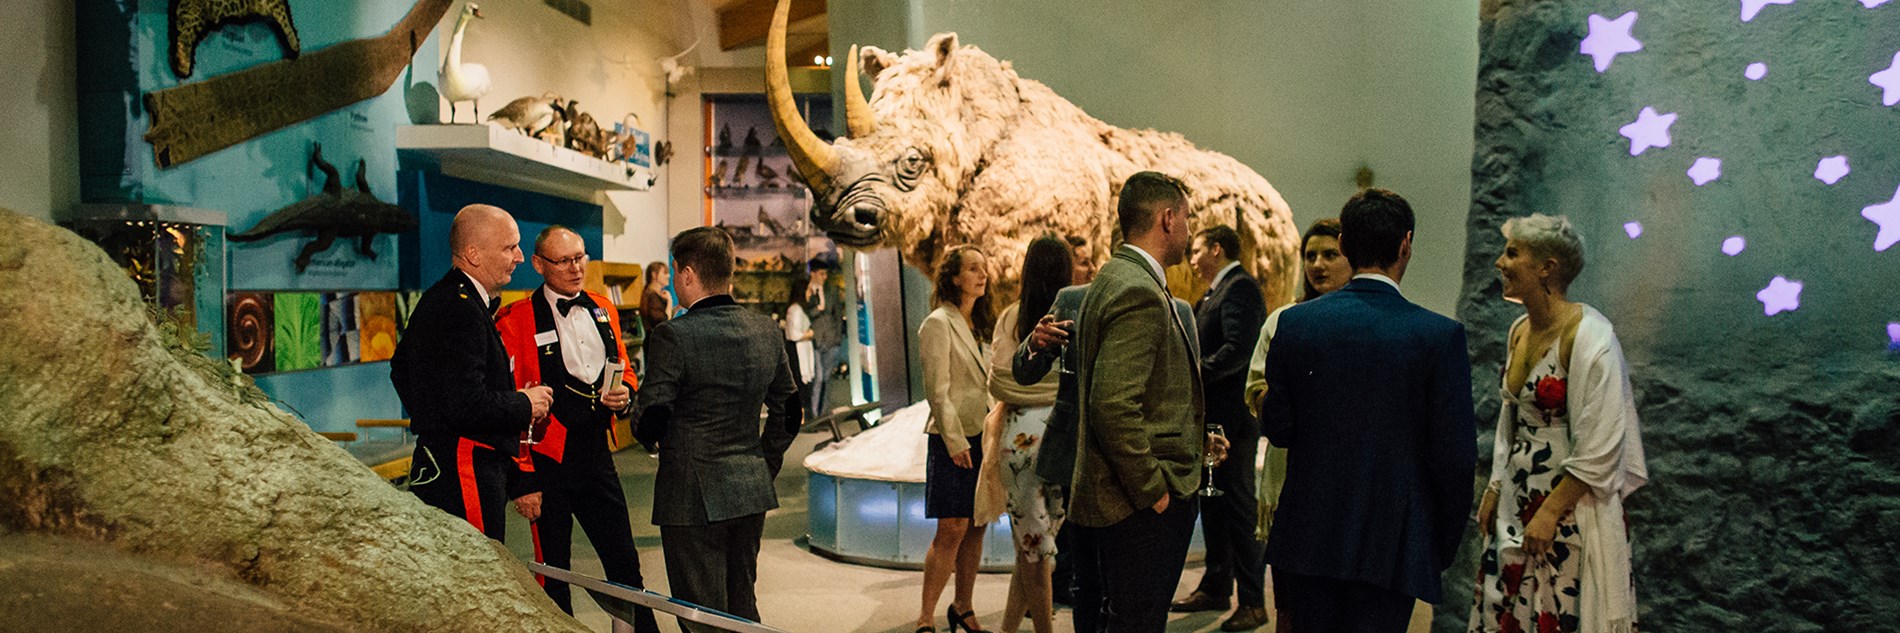 A group of people socialising in formal clothes at a drinks reception at Weston Park Museum in front a life-size model of a woolly rhino.